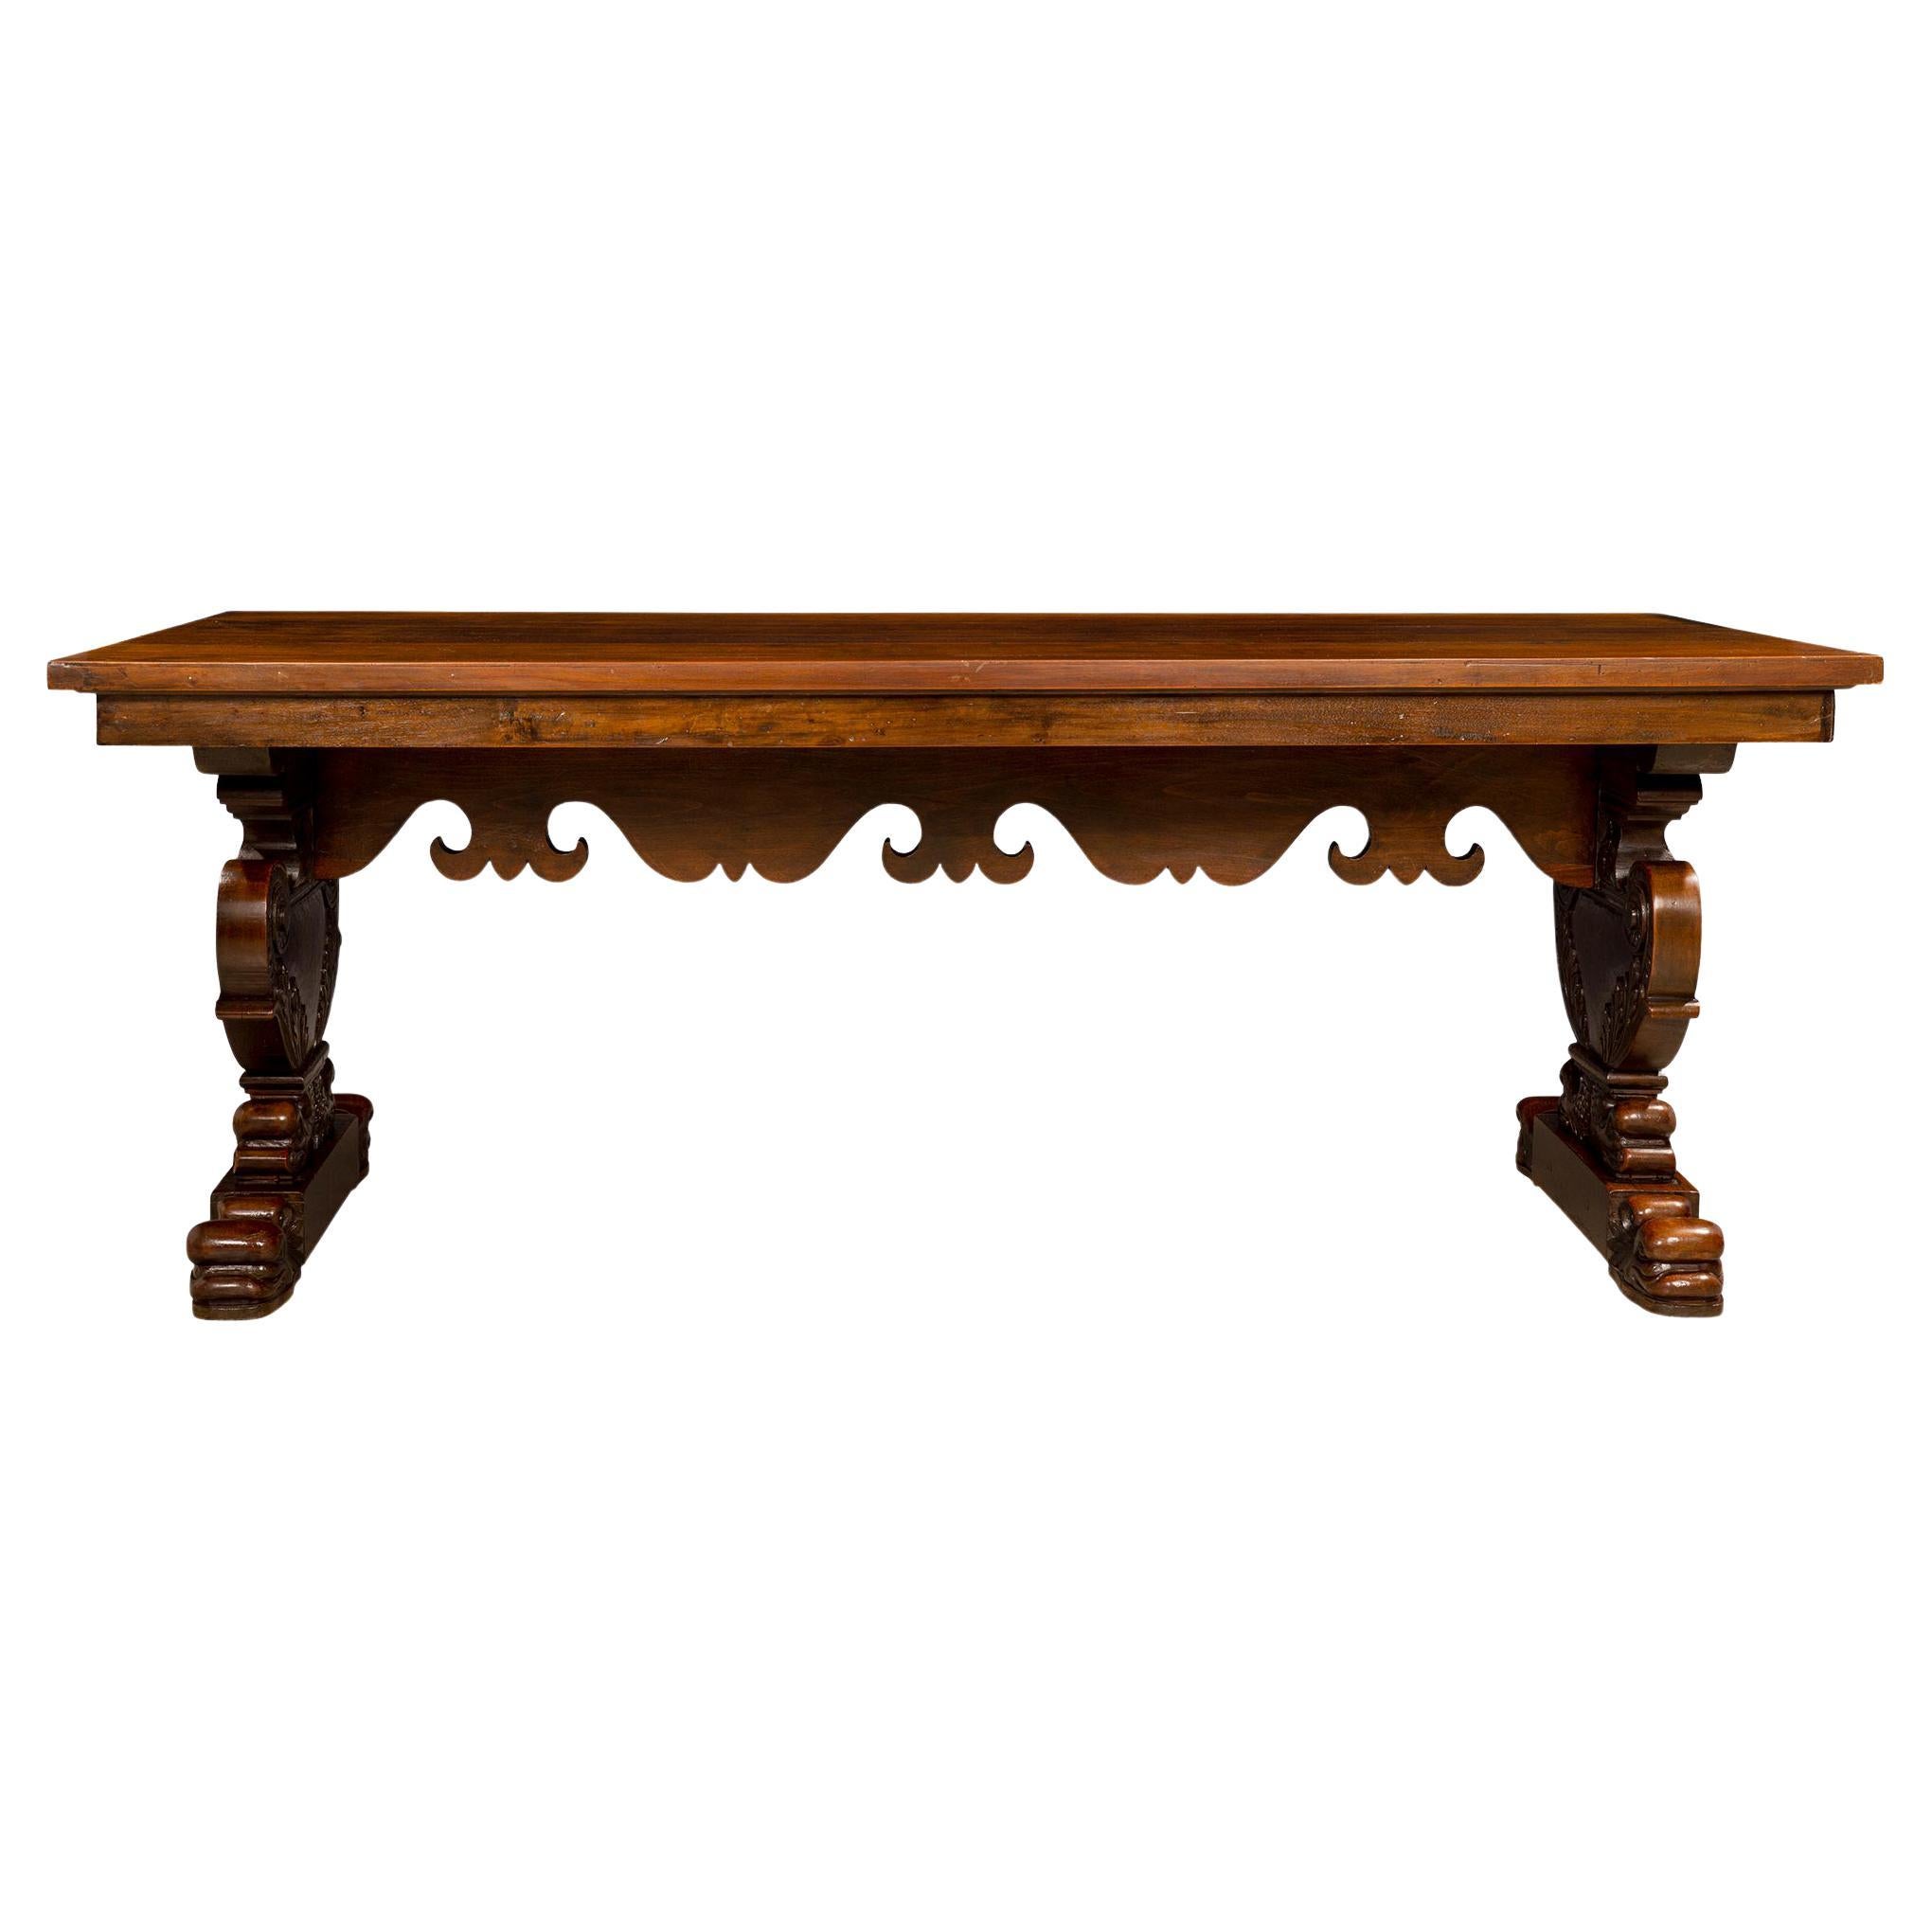 Italian Early 19th Century Solid Walnut Dining Table For Sale